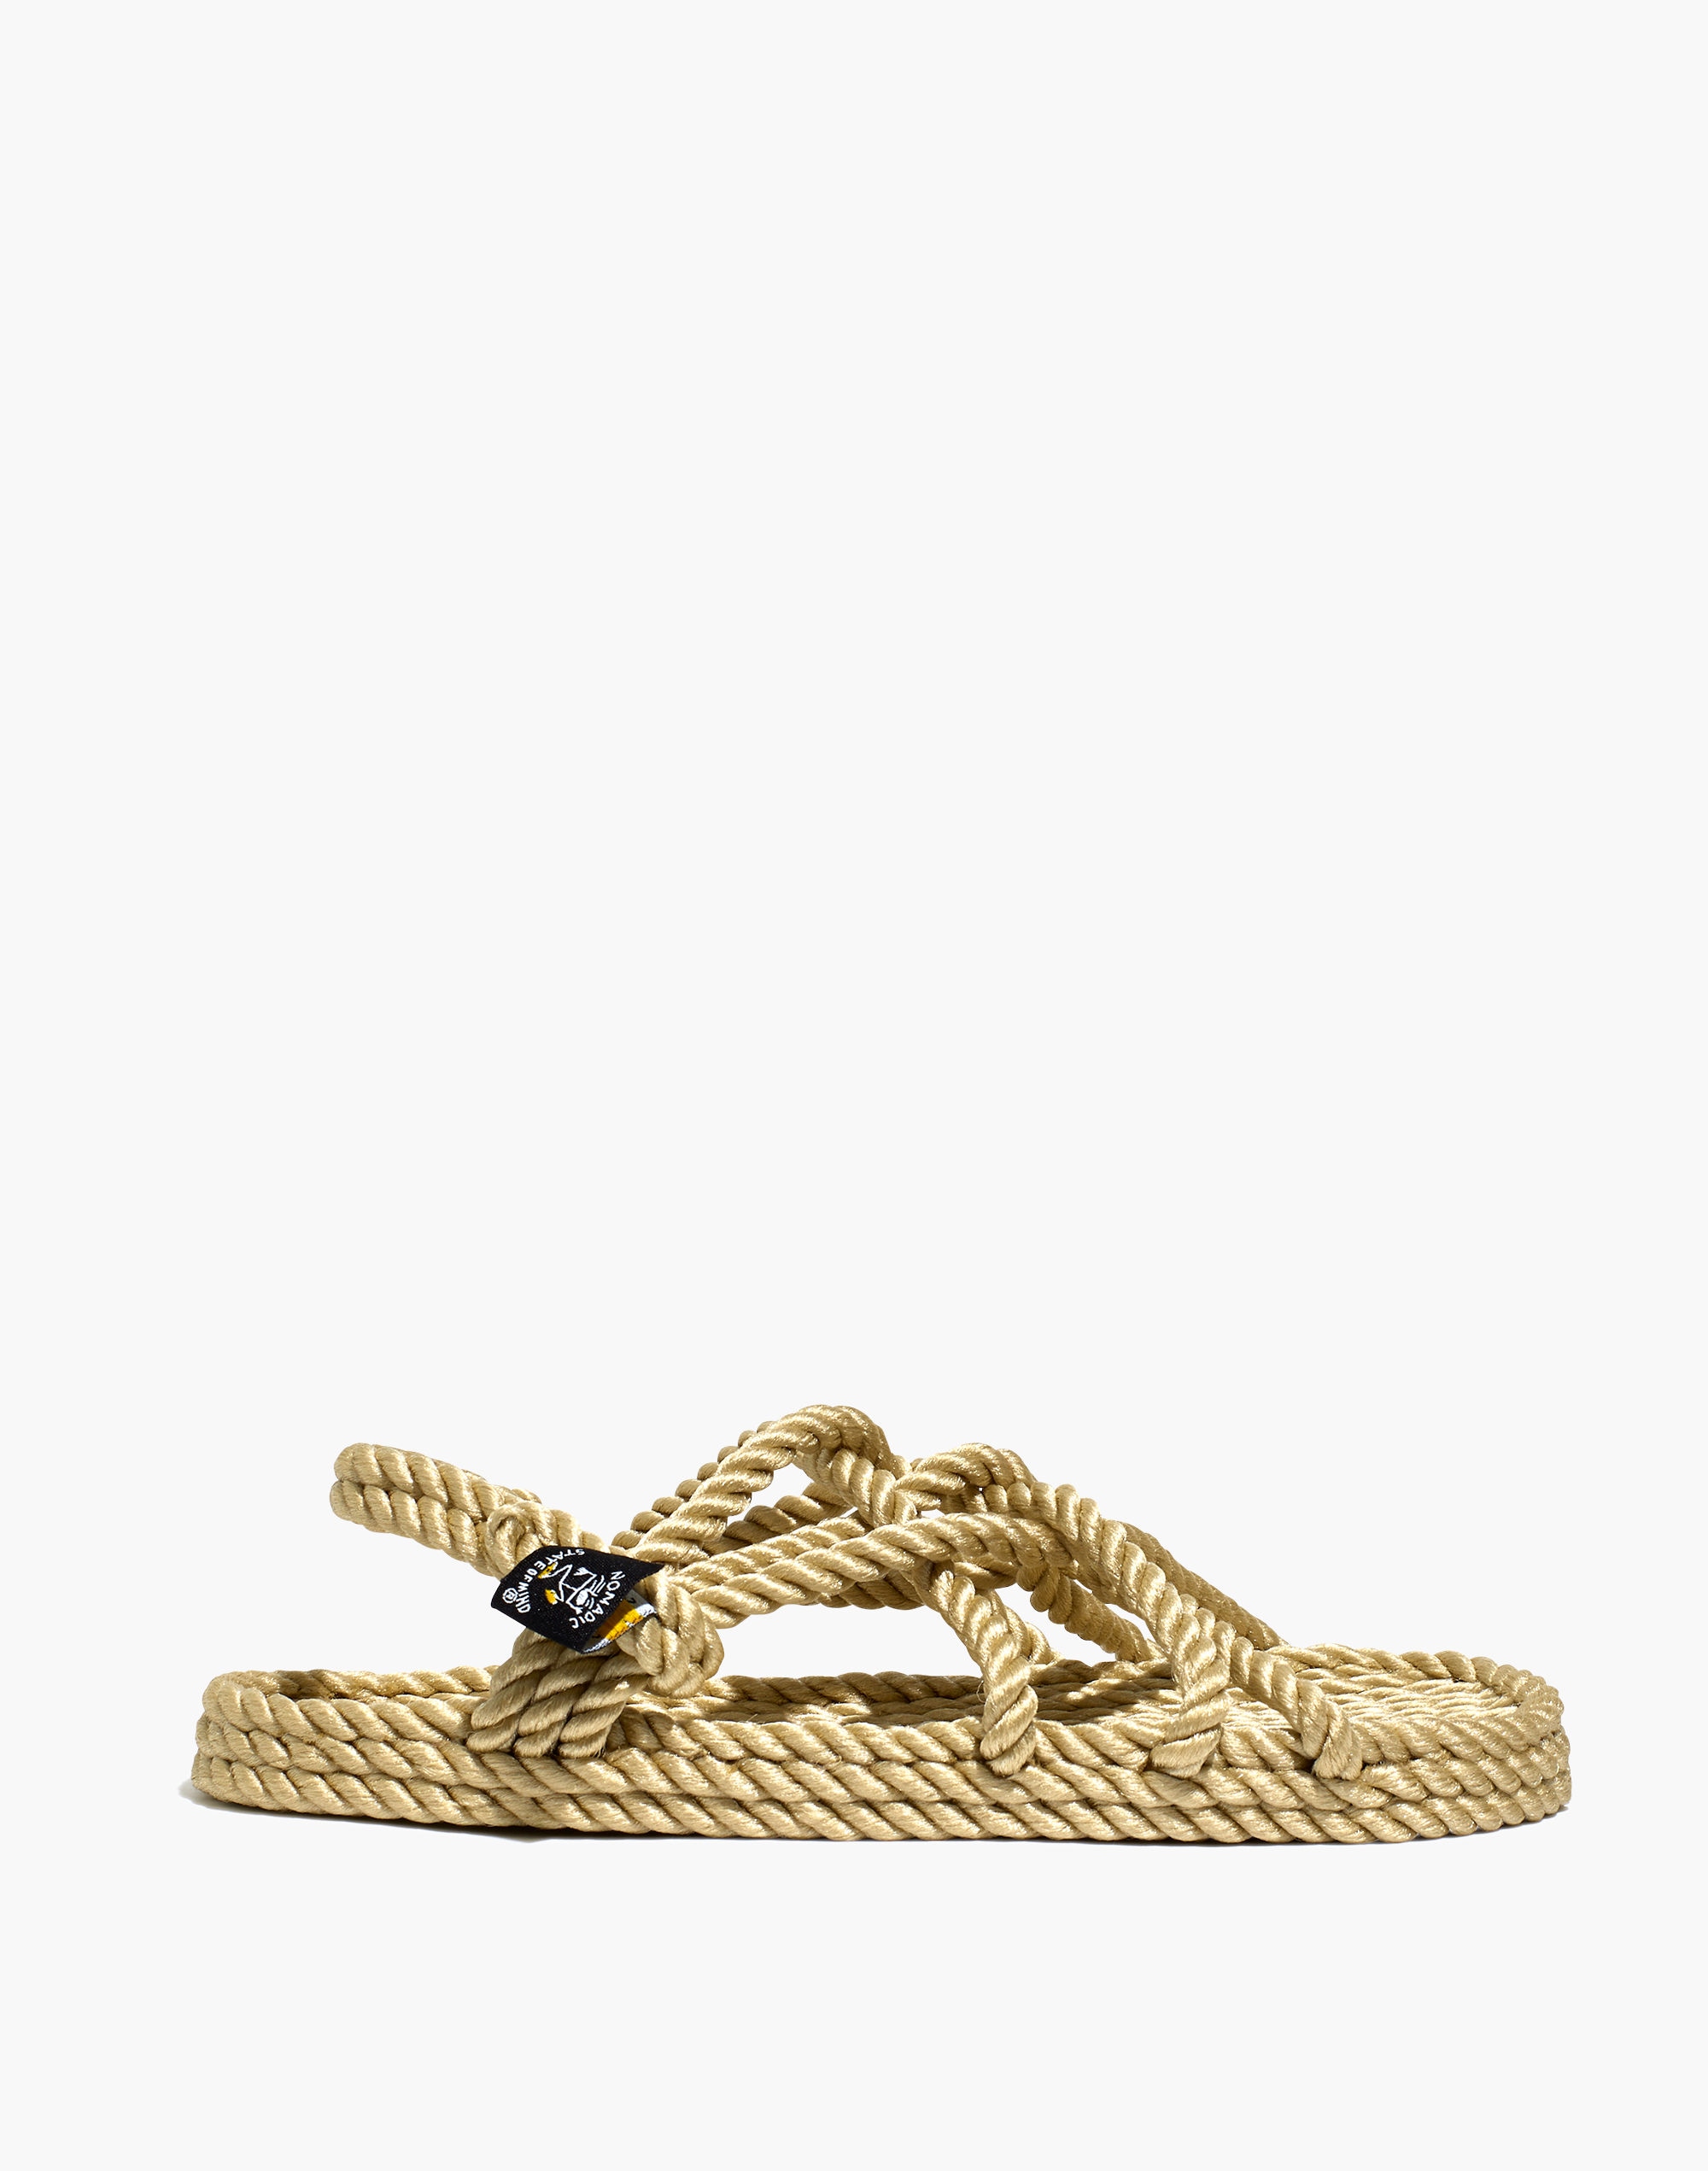 Nomad Sandal ($925) ❤ liked on Polyvore featuring shoes, sandals